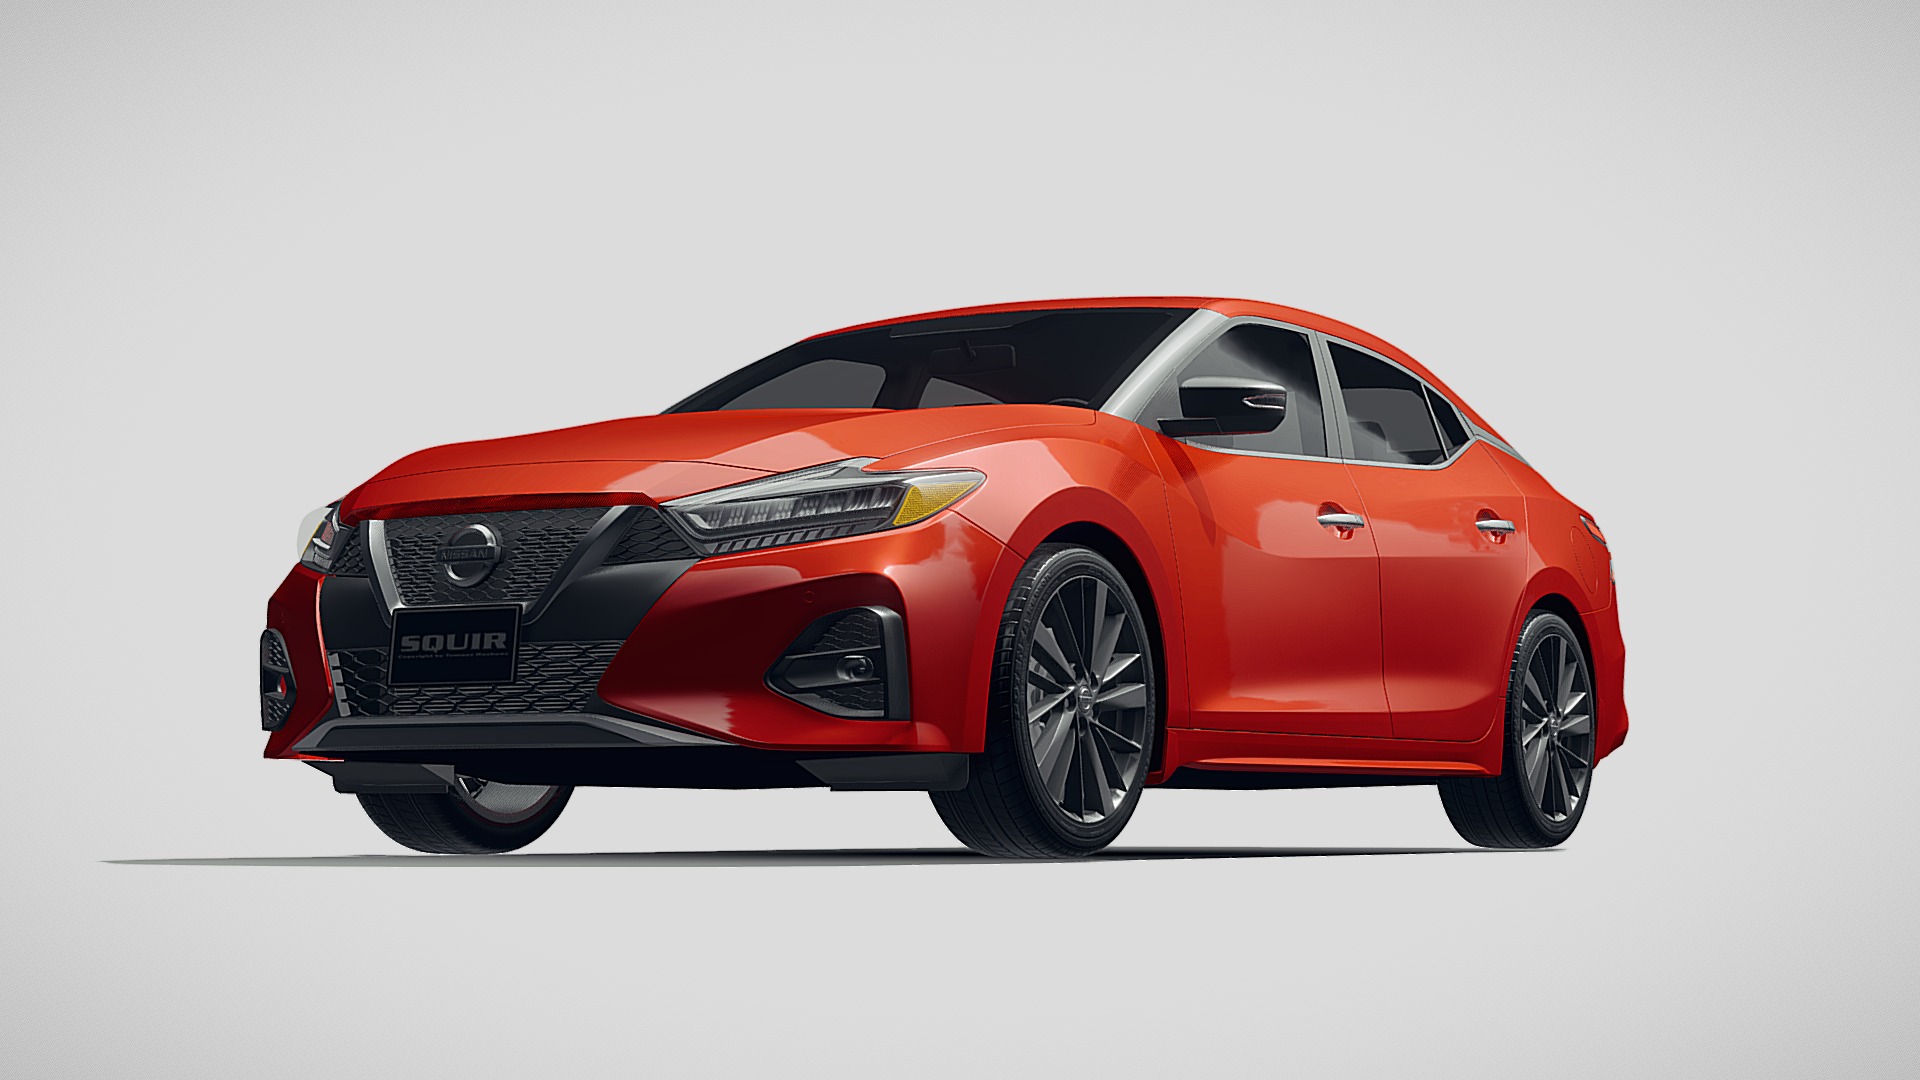 3D model Nissan Maxima 2019 - This is a 3D model of the Nissan Maxima 2019. The 3D model is about a red sports car.